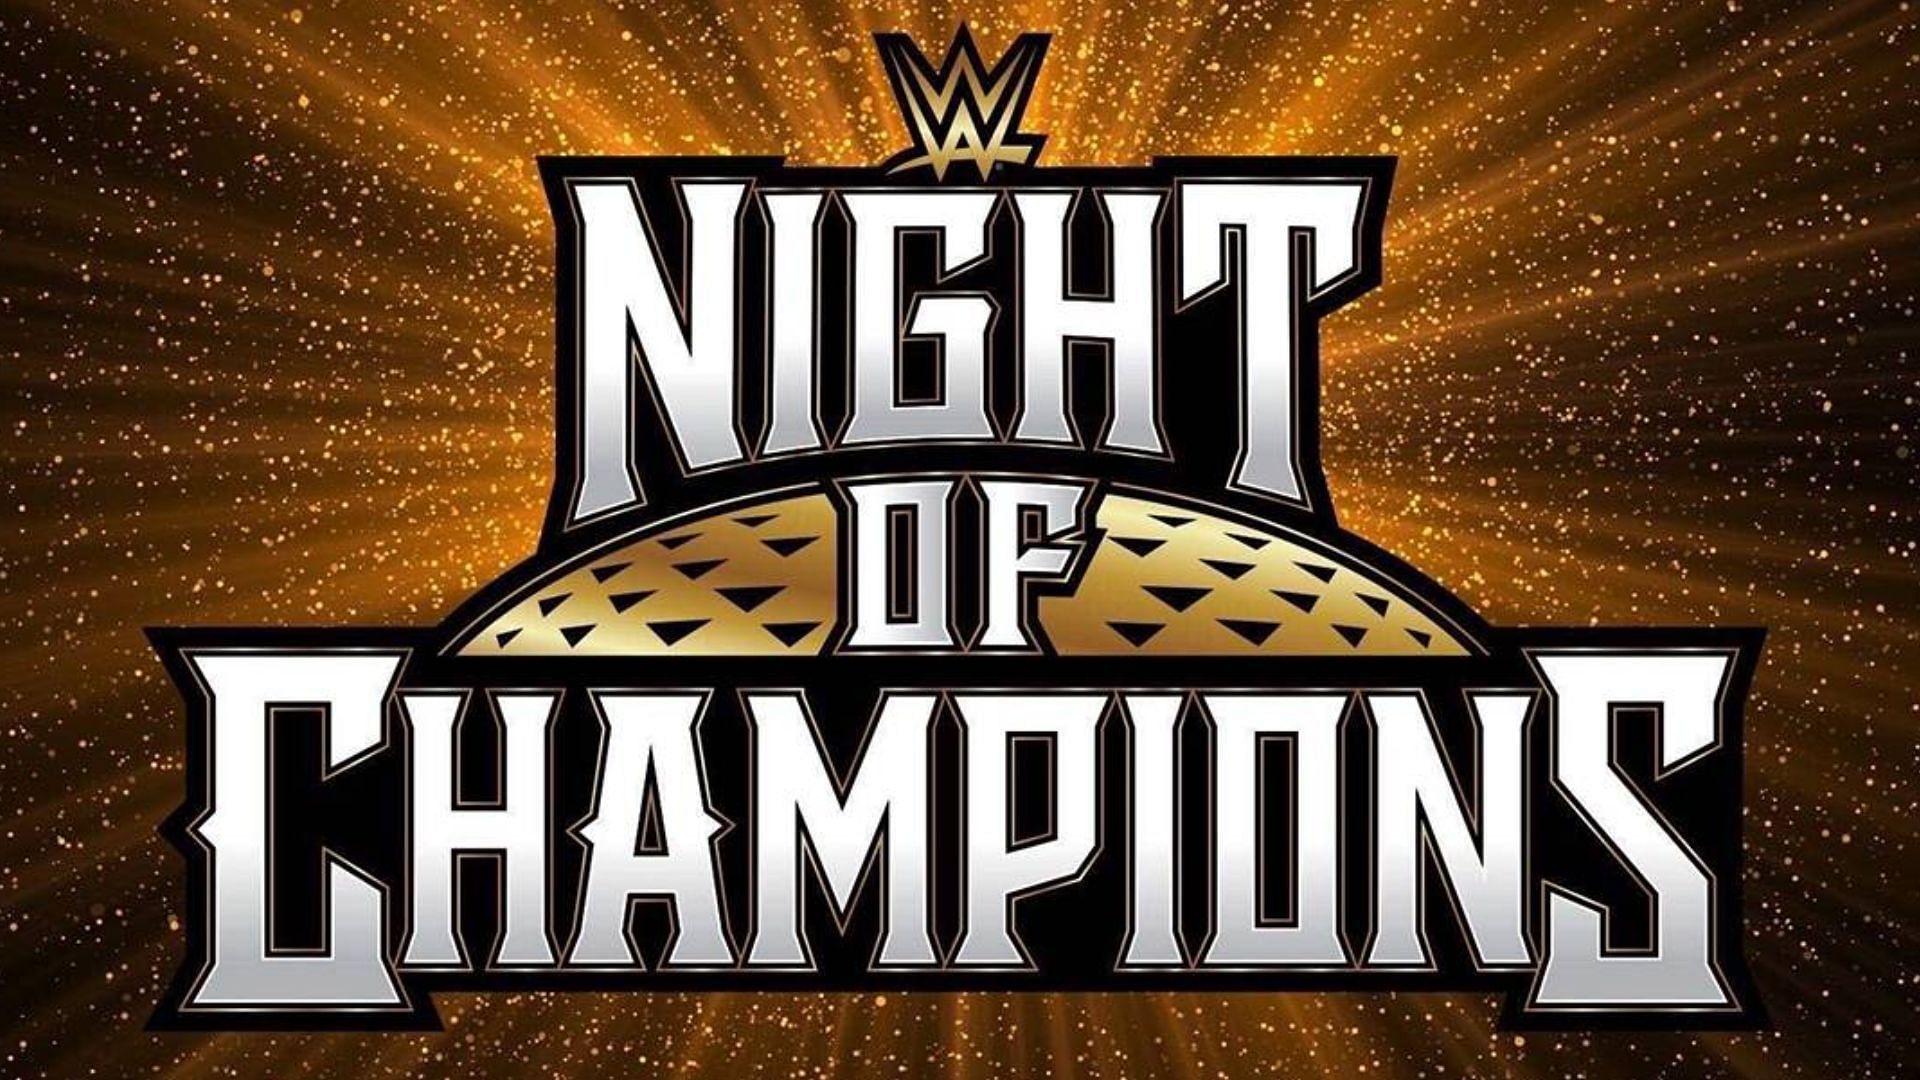 WWE Night of Champions is scheduled for May 27th in Saudi Arabia.